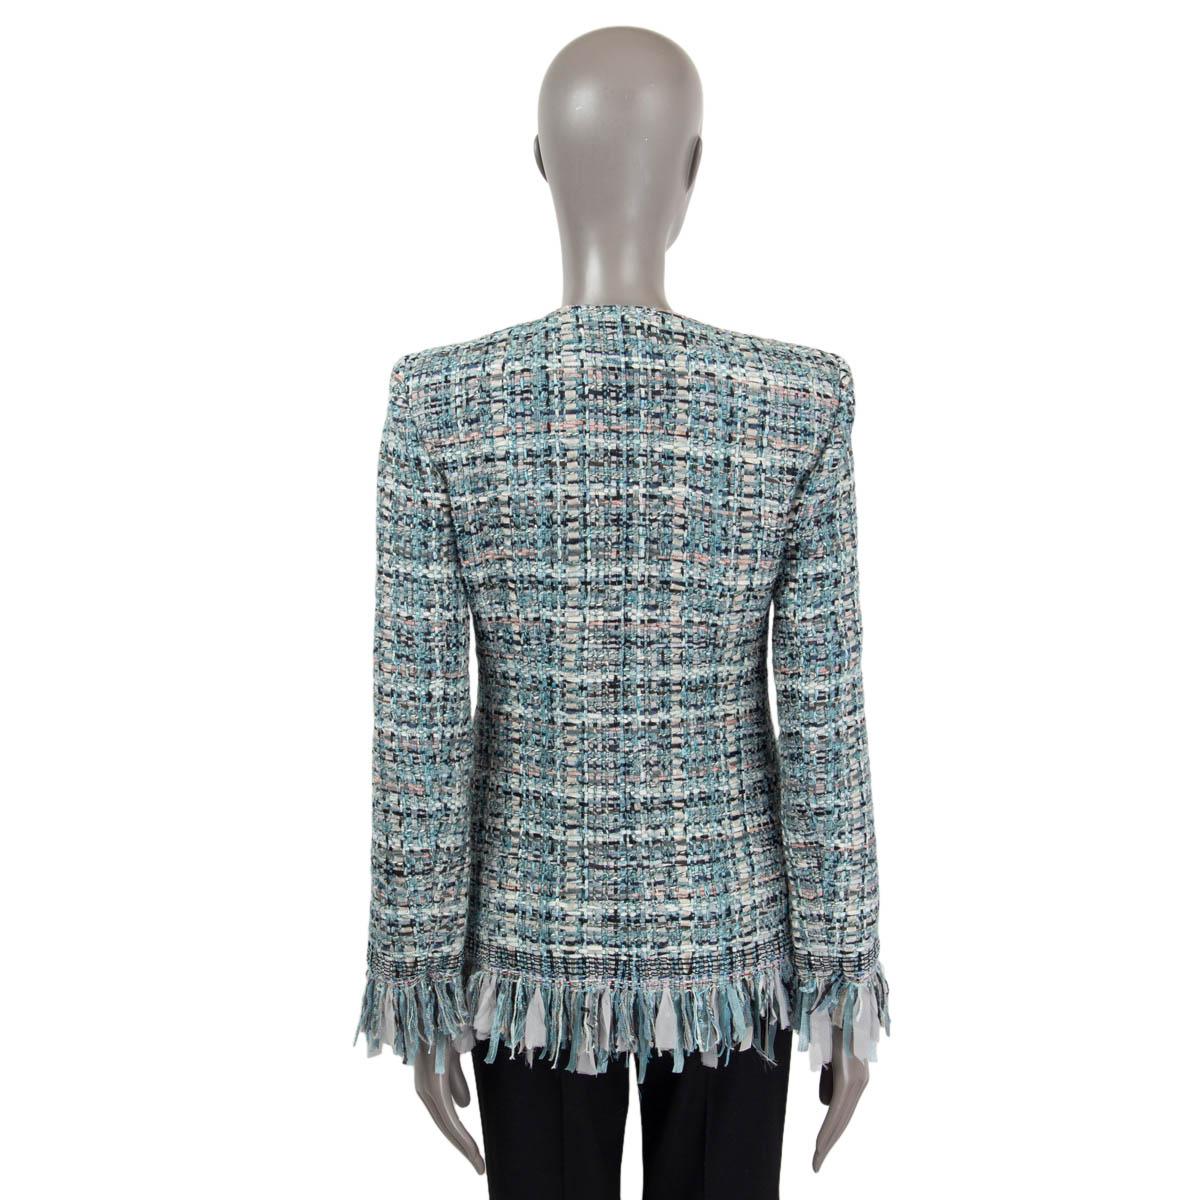 CHANEL light blue cotton 2017 17A COSMOPOLITE FRINGED Jacket 38 S For Sale 1